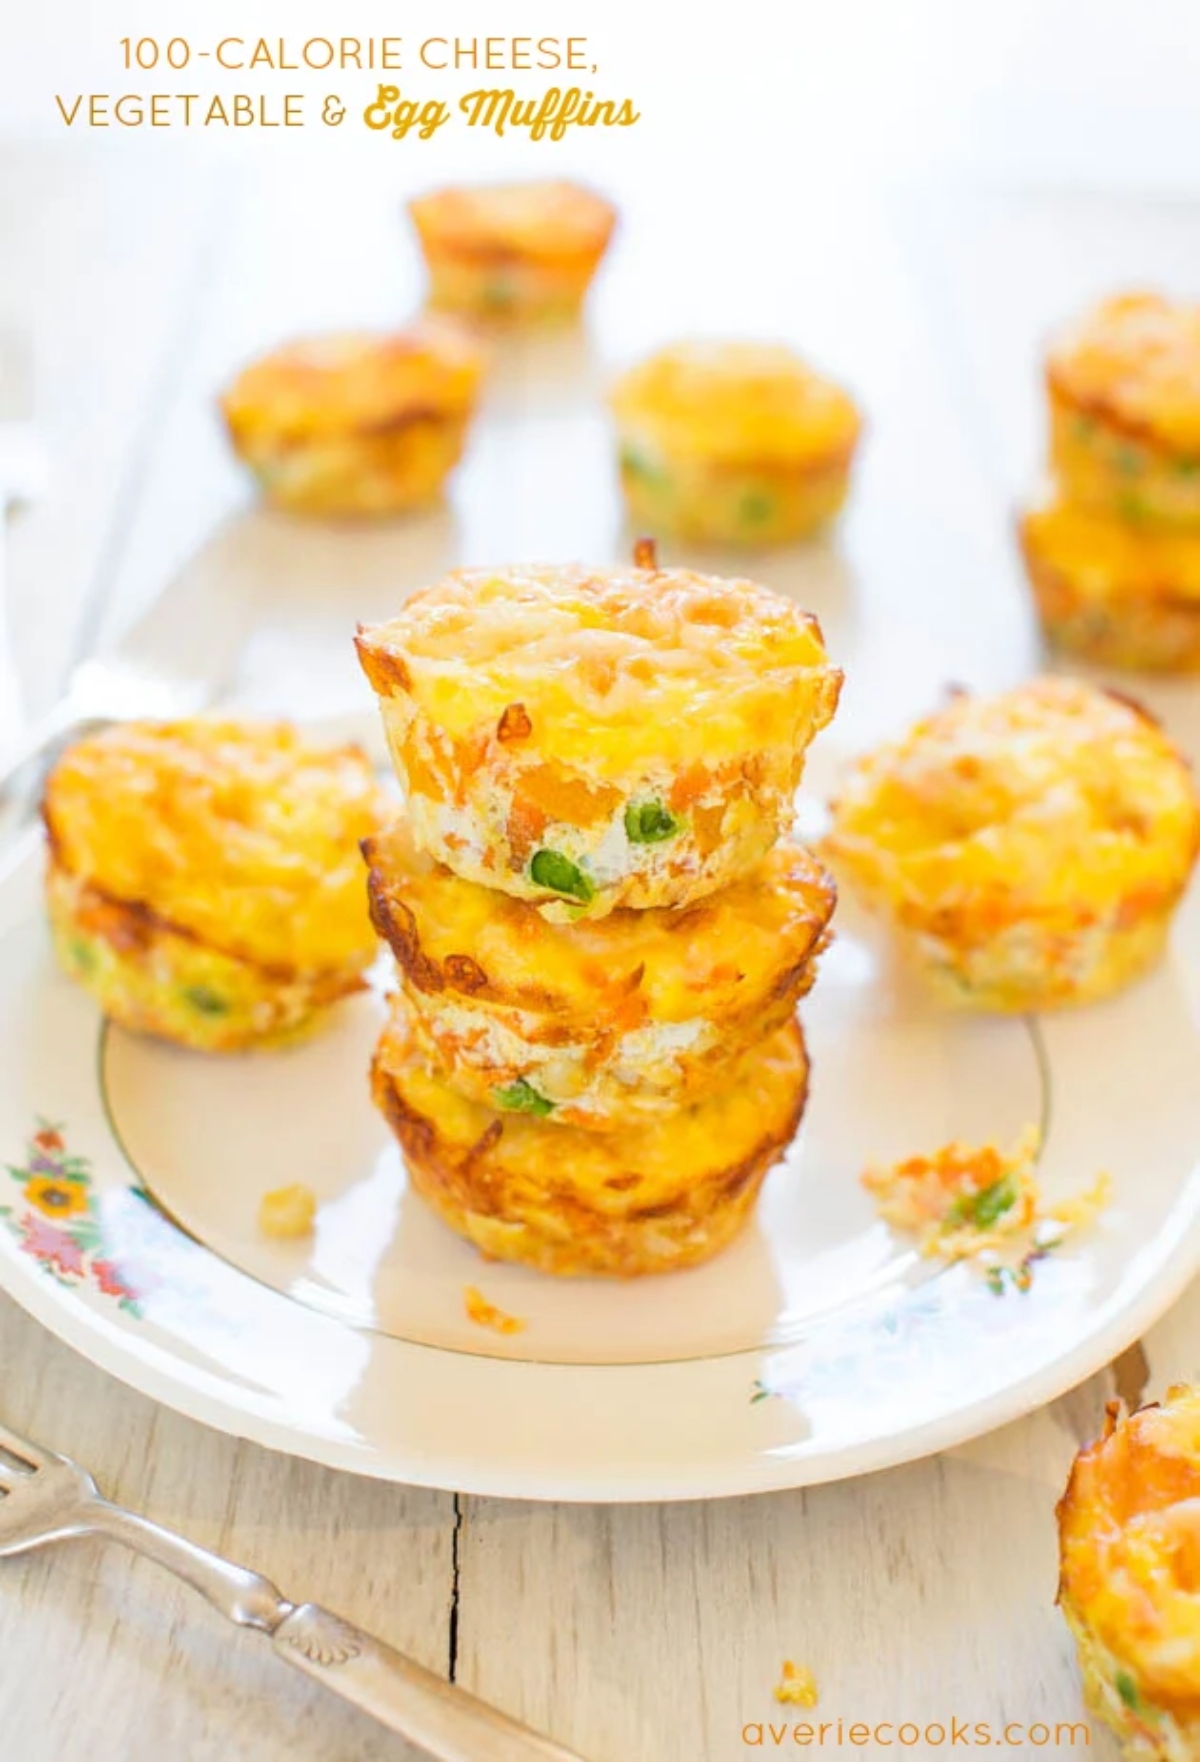 Veggie and Egg muffins